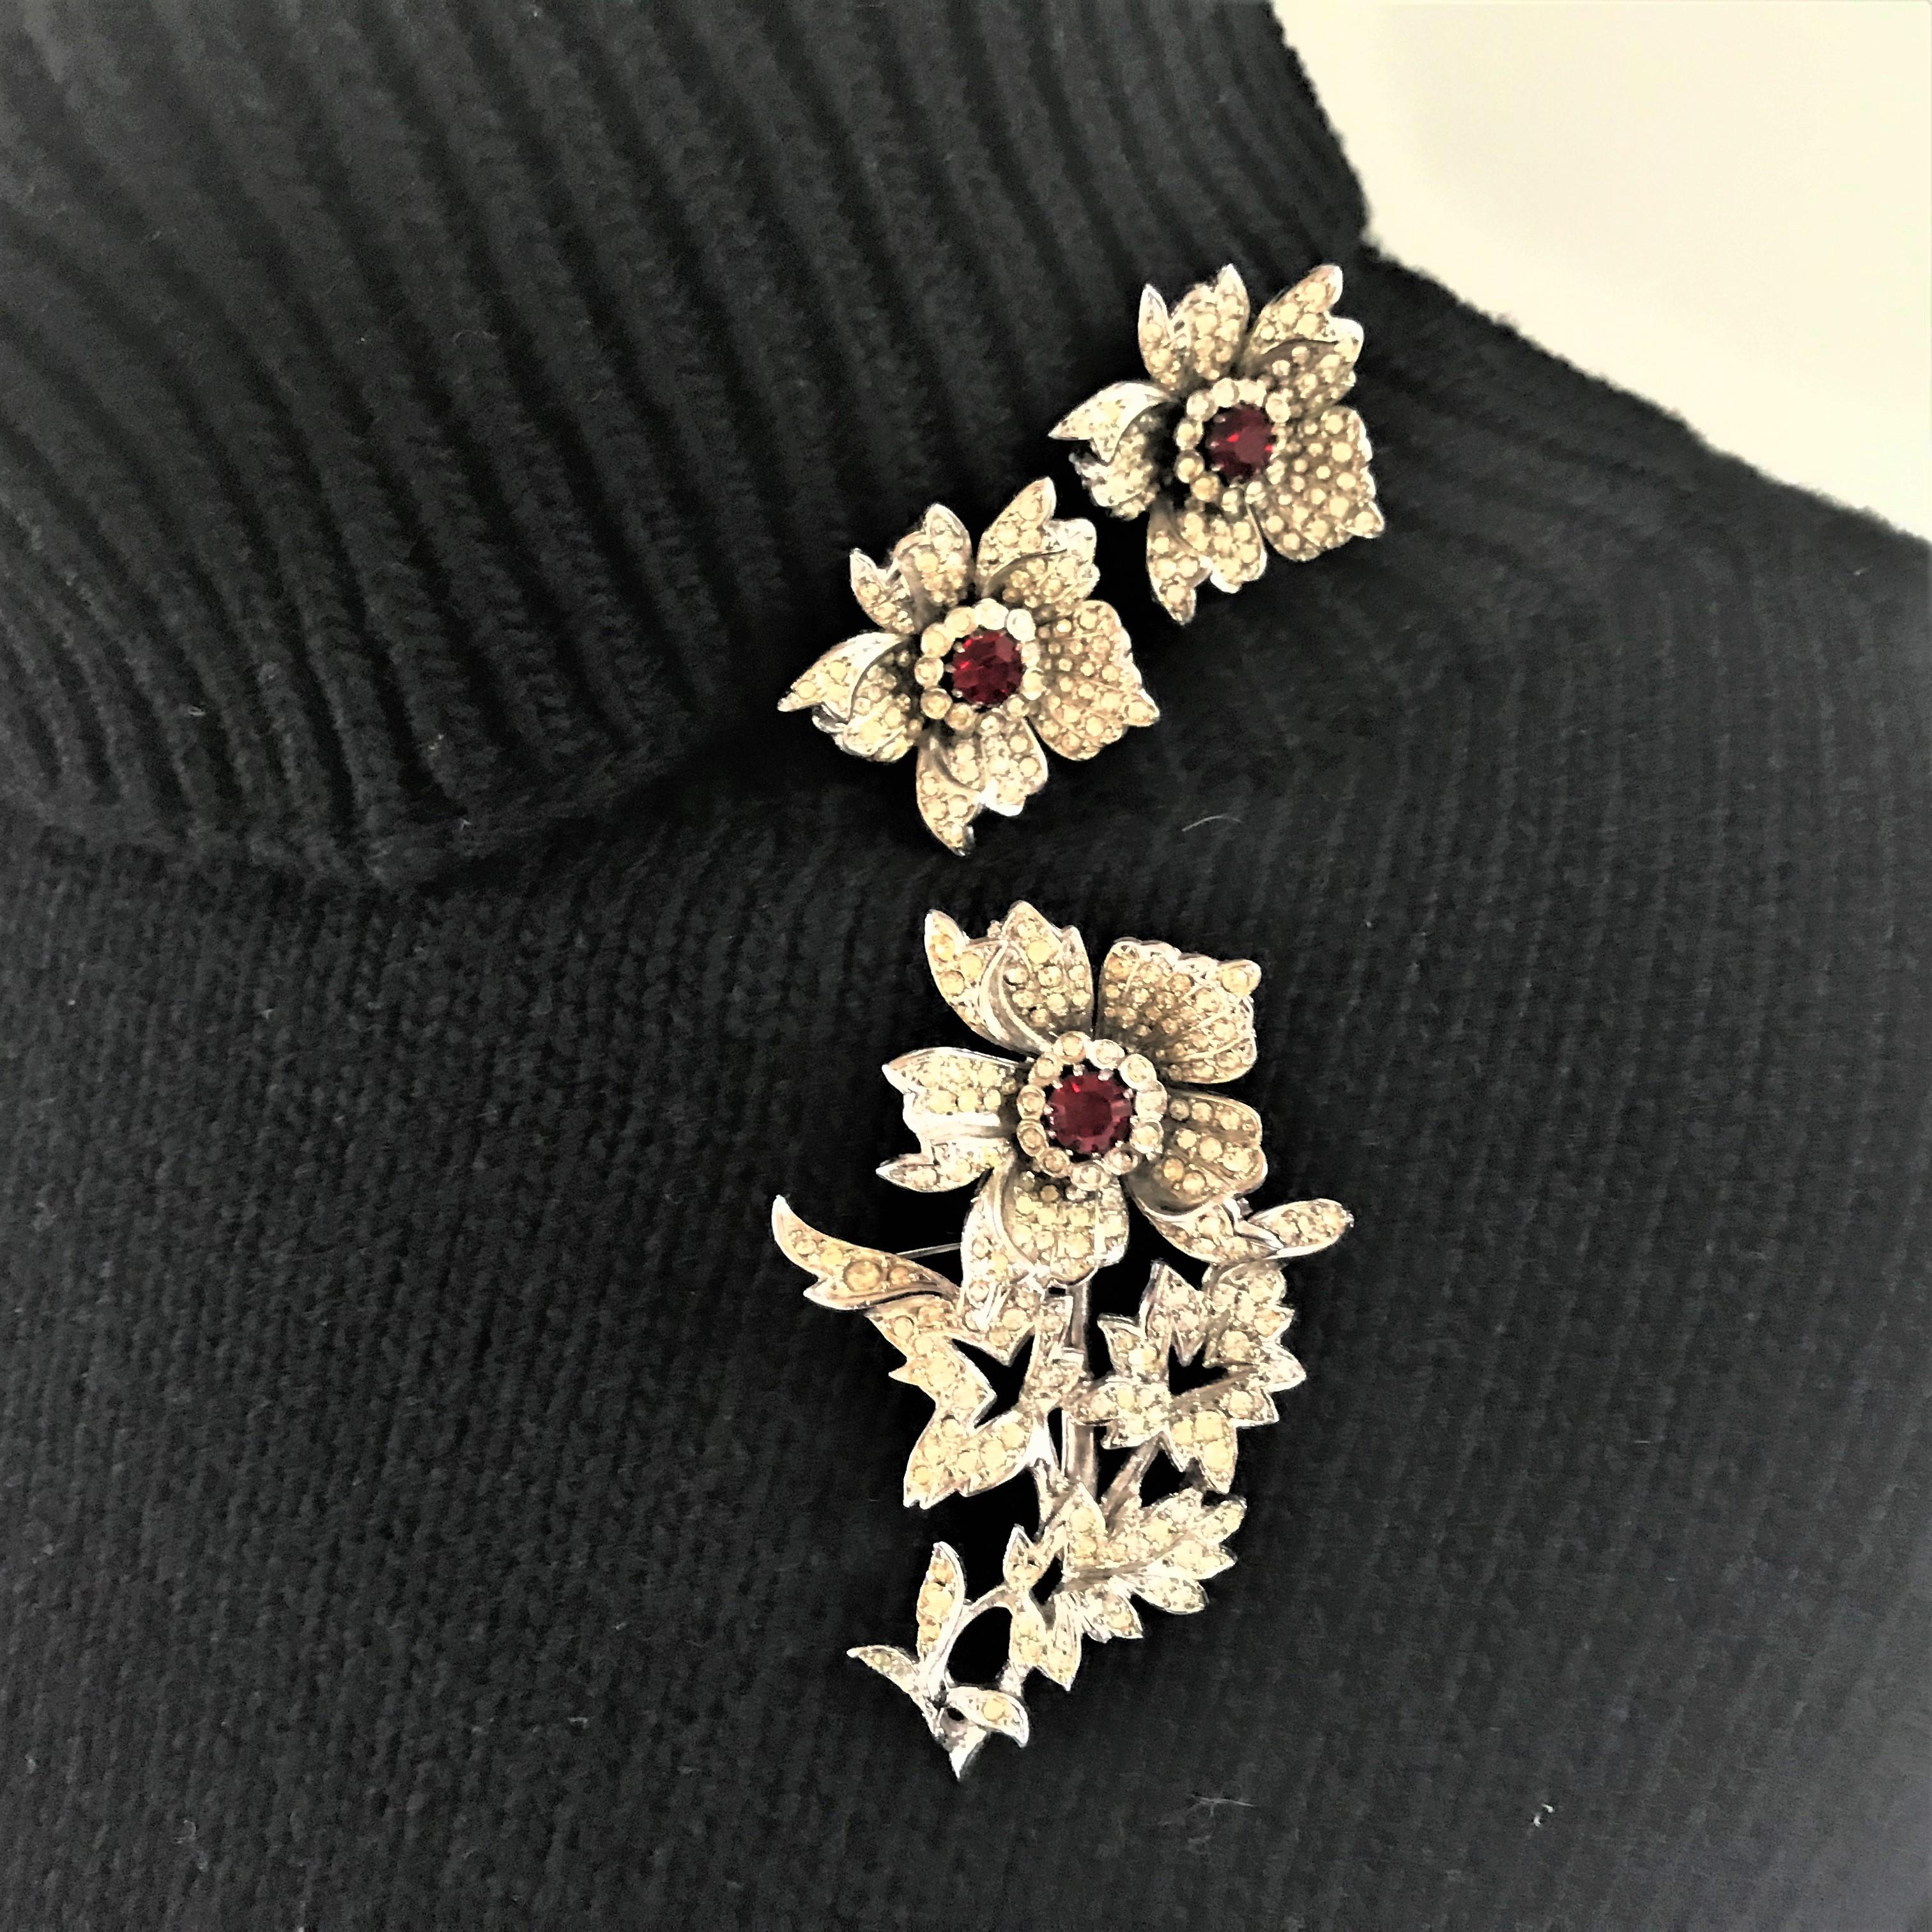 Women's Vintage Brooch and matching ear clips set rhodium and rhinestones 1940s USA  For Sale